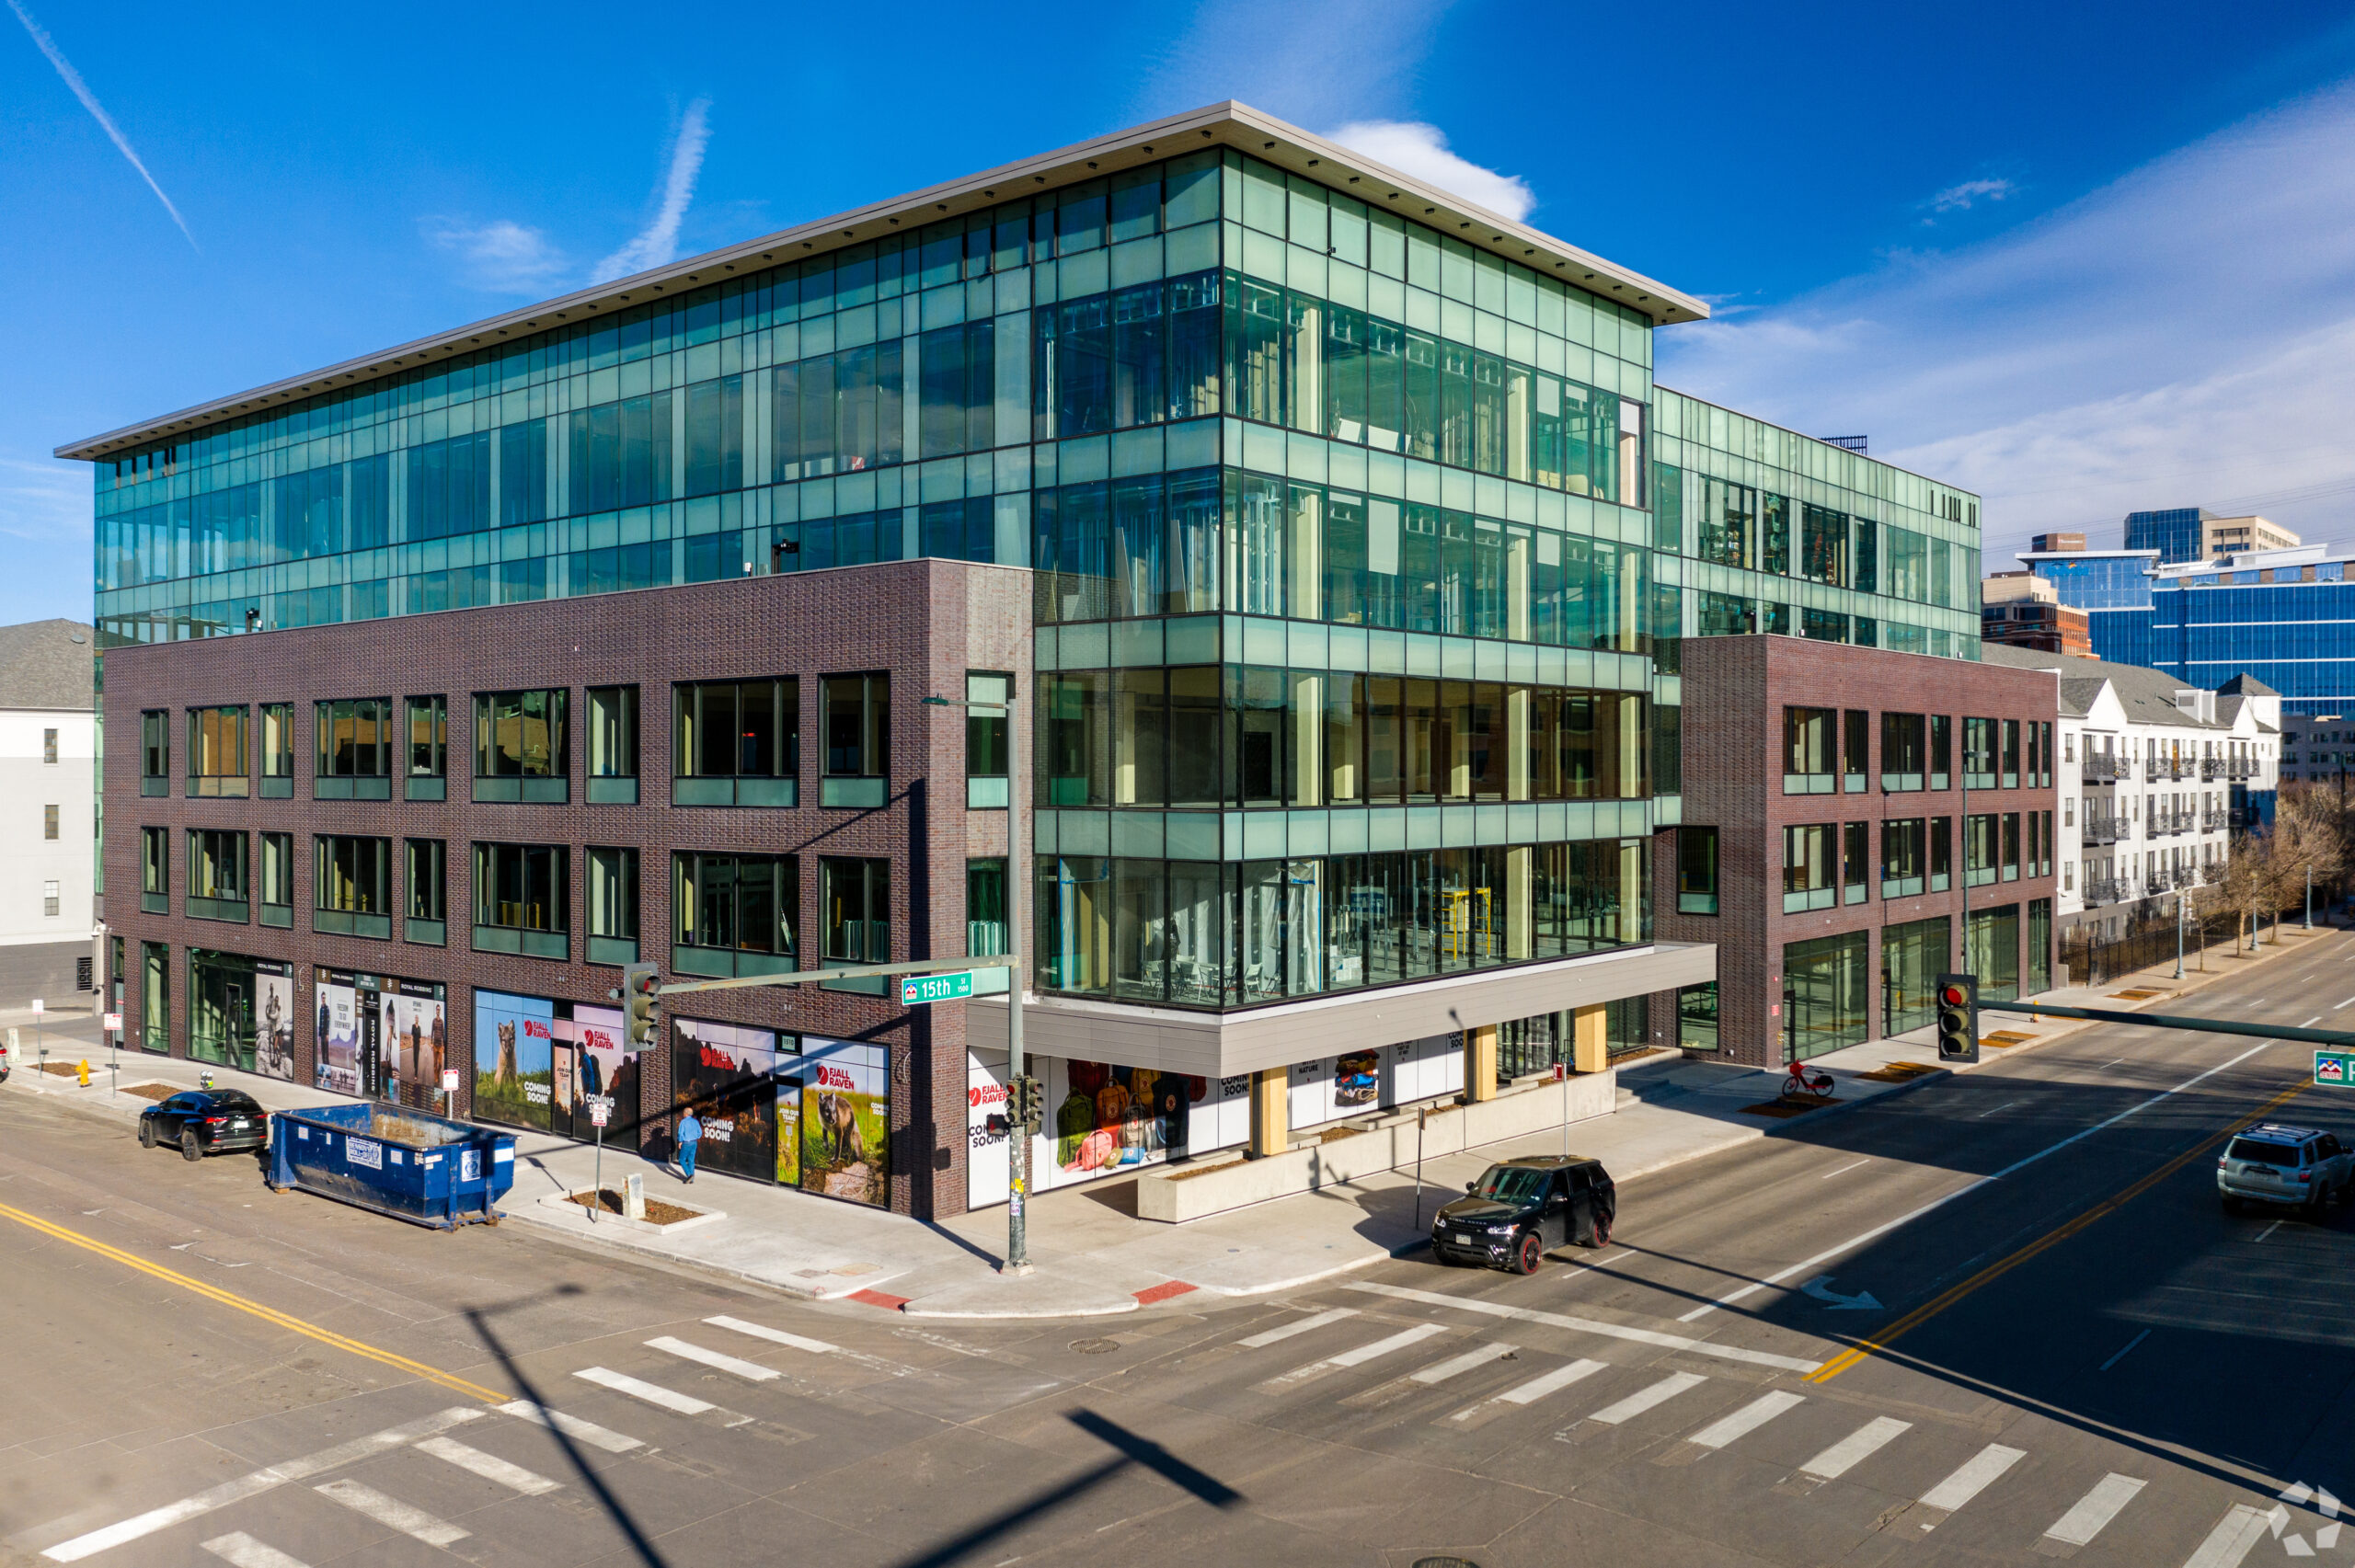 10-Year Lease Signed at 2373 15th St. Denver, CO.